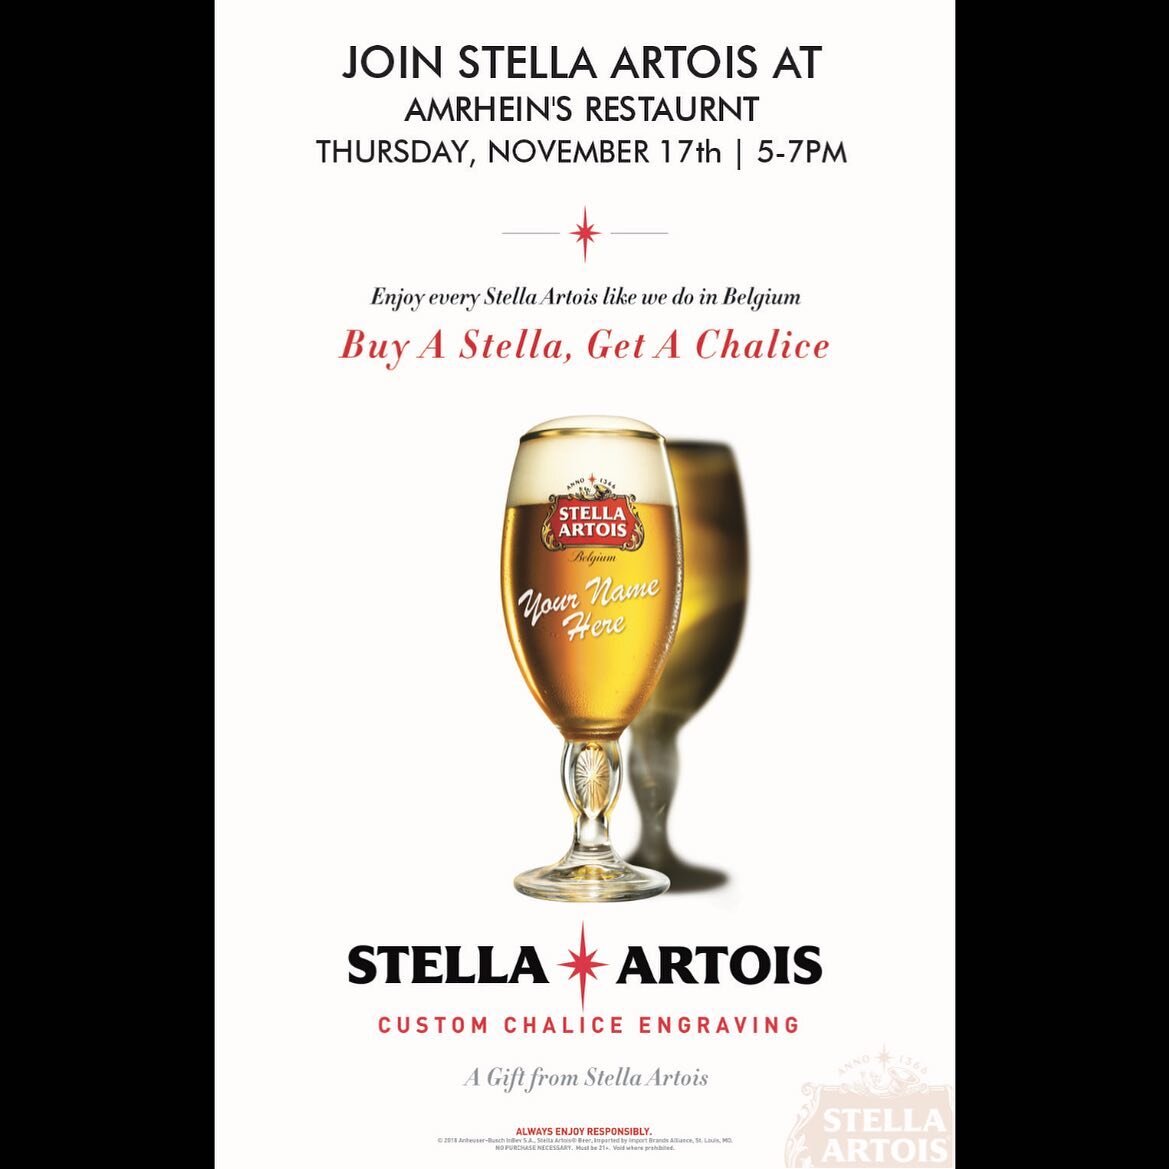 Calling all Stella fans! Join us this Thursday 11/17 for a fun packed Stella party. The Stella team will be at Amrheins Engraving Stella glasses. 
.
.
. Peri
#Stella #Boston #Southie #BostonThingsToDo #BostonBar #BostonBrunch #Beer #things to do #Loc